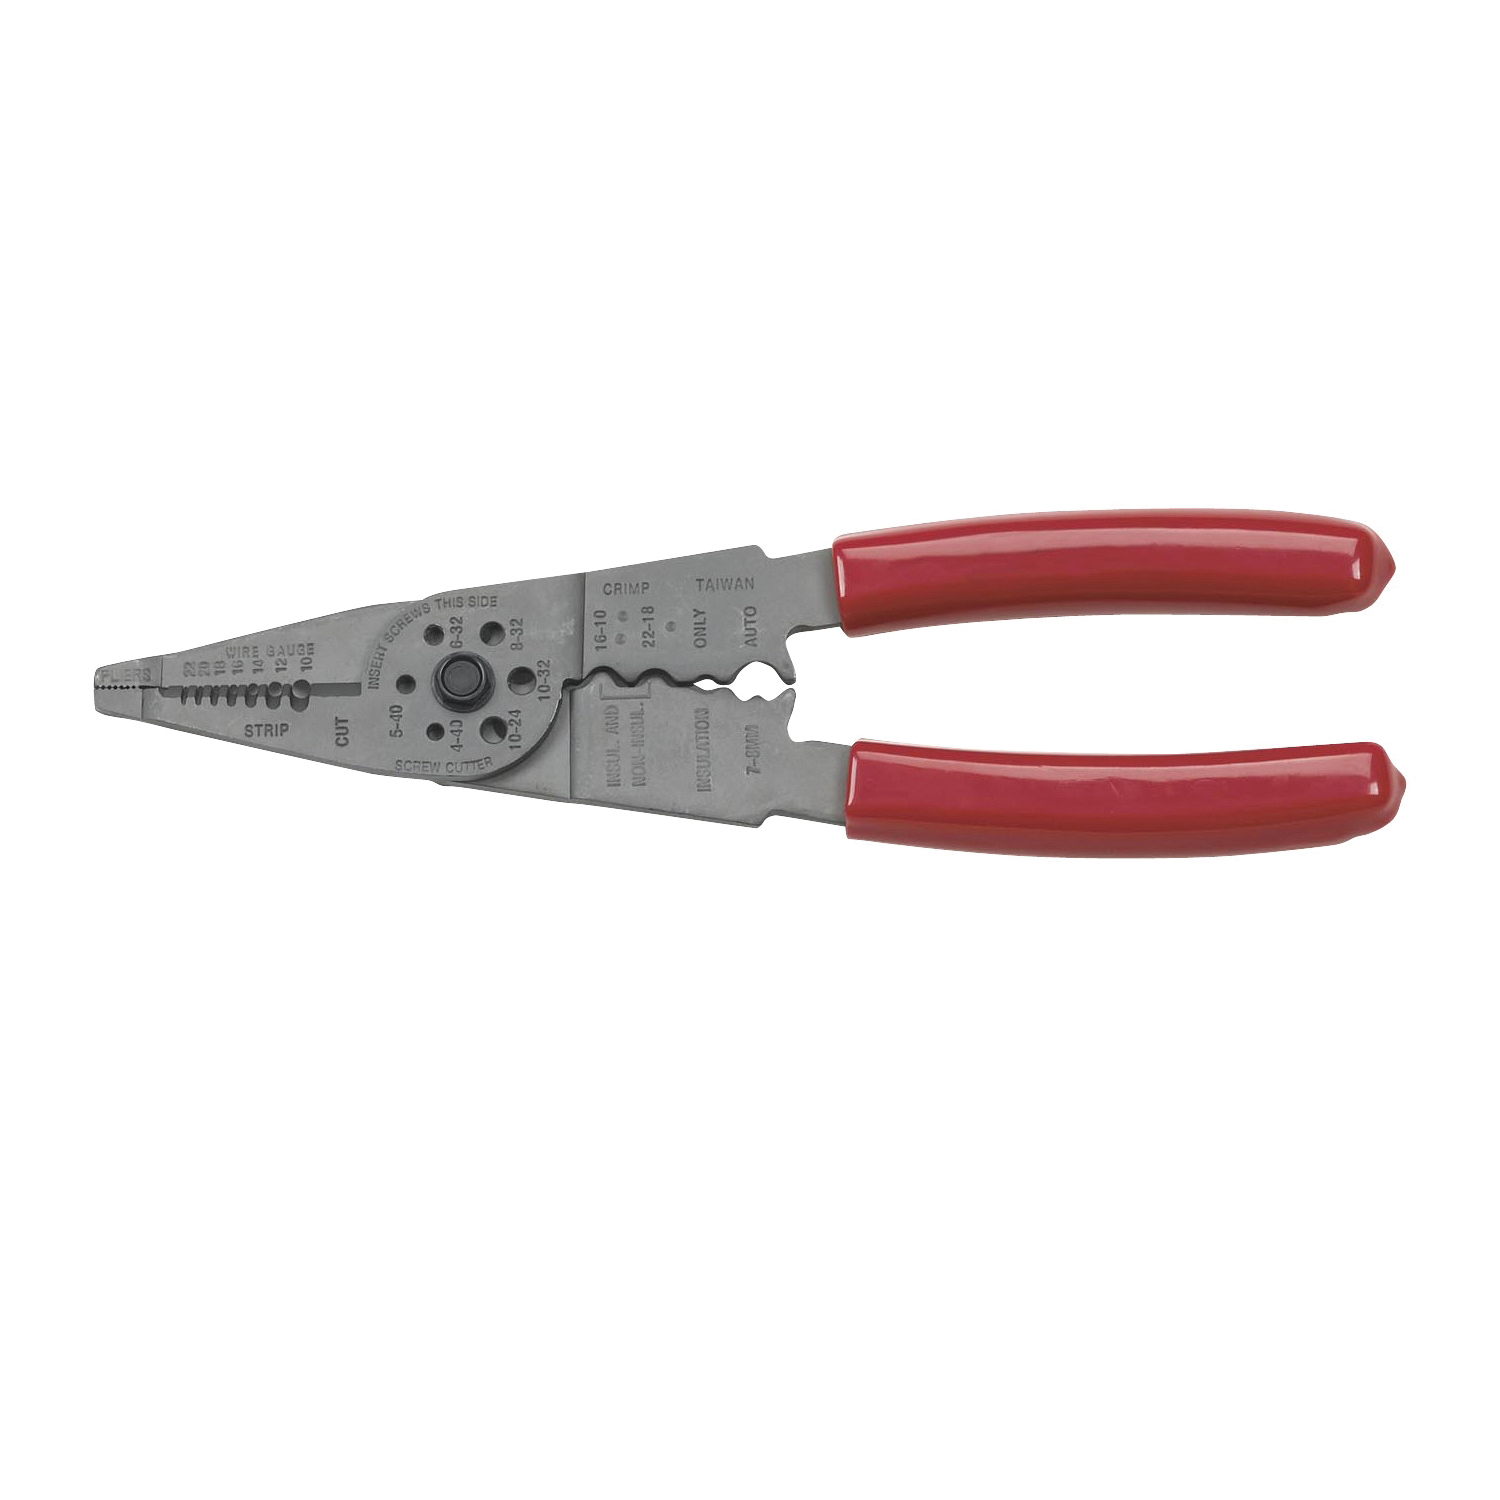 2162D Electrical Wire Stripper and Crimper, 10 to 22 AWG Wire, 22 to 20, 22 to 10 AWG Stripping